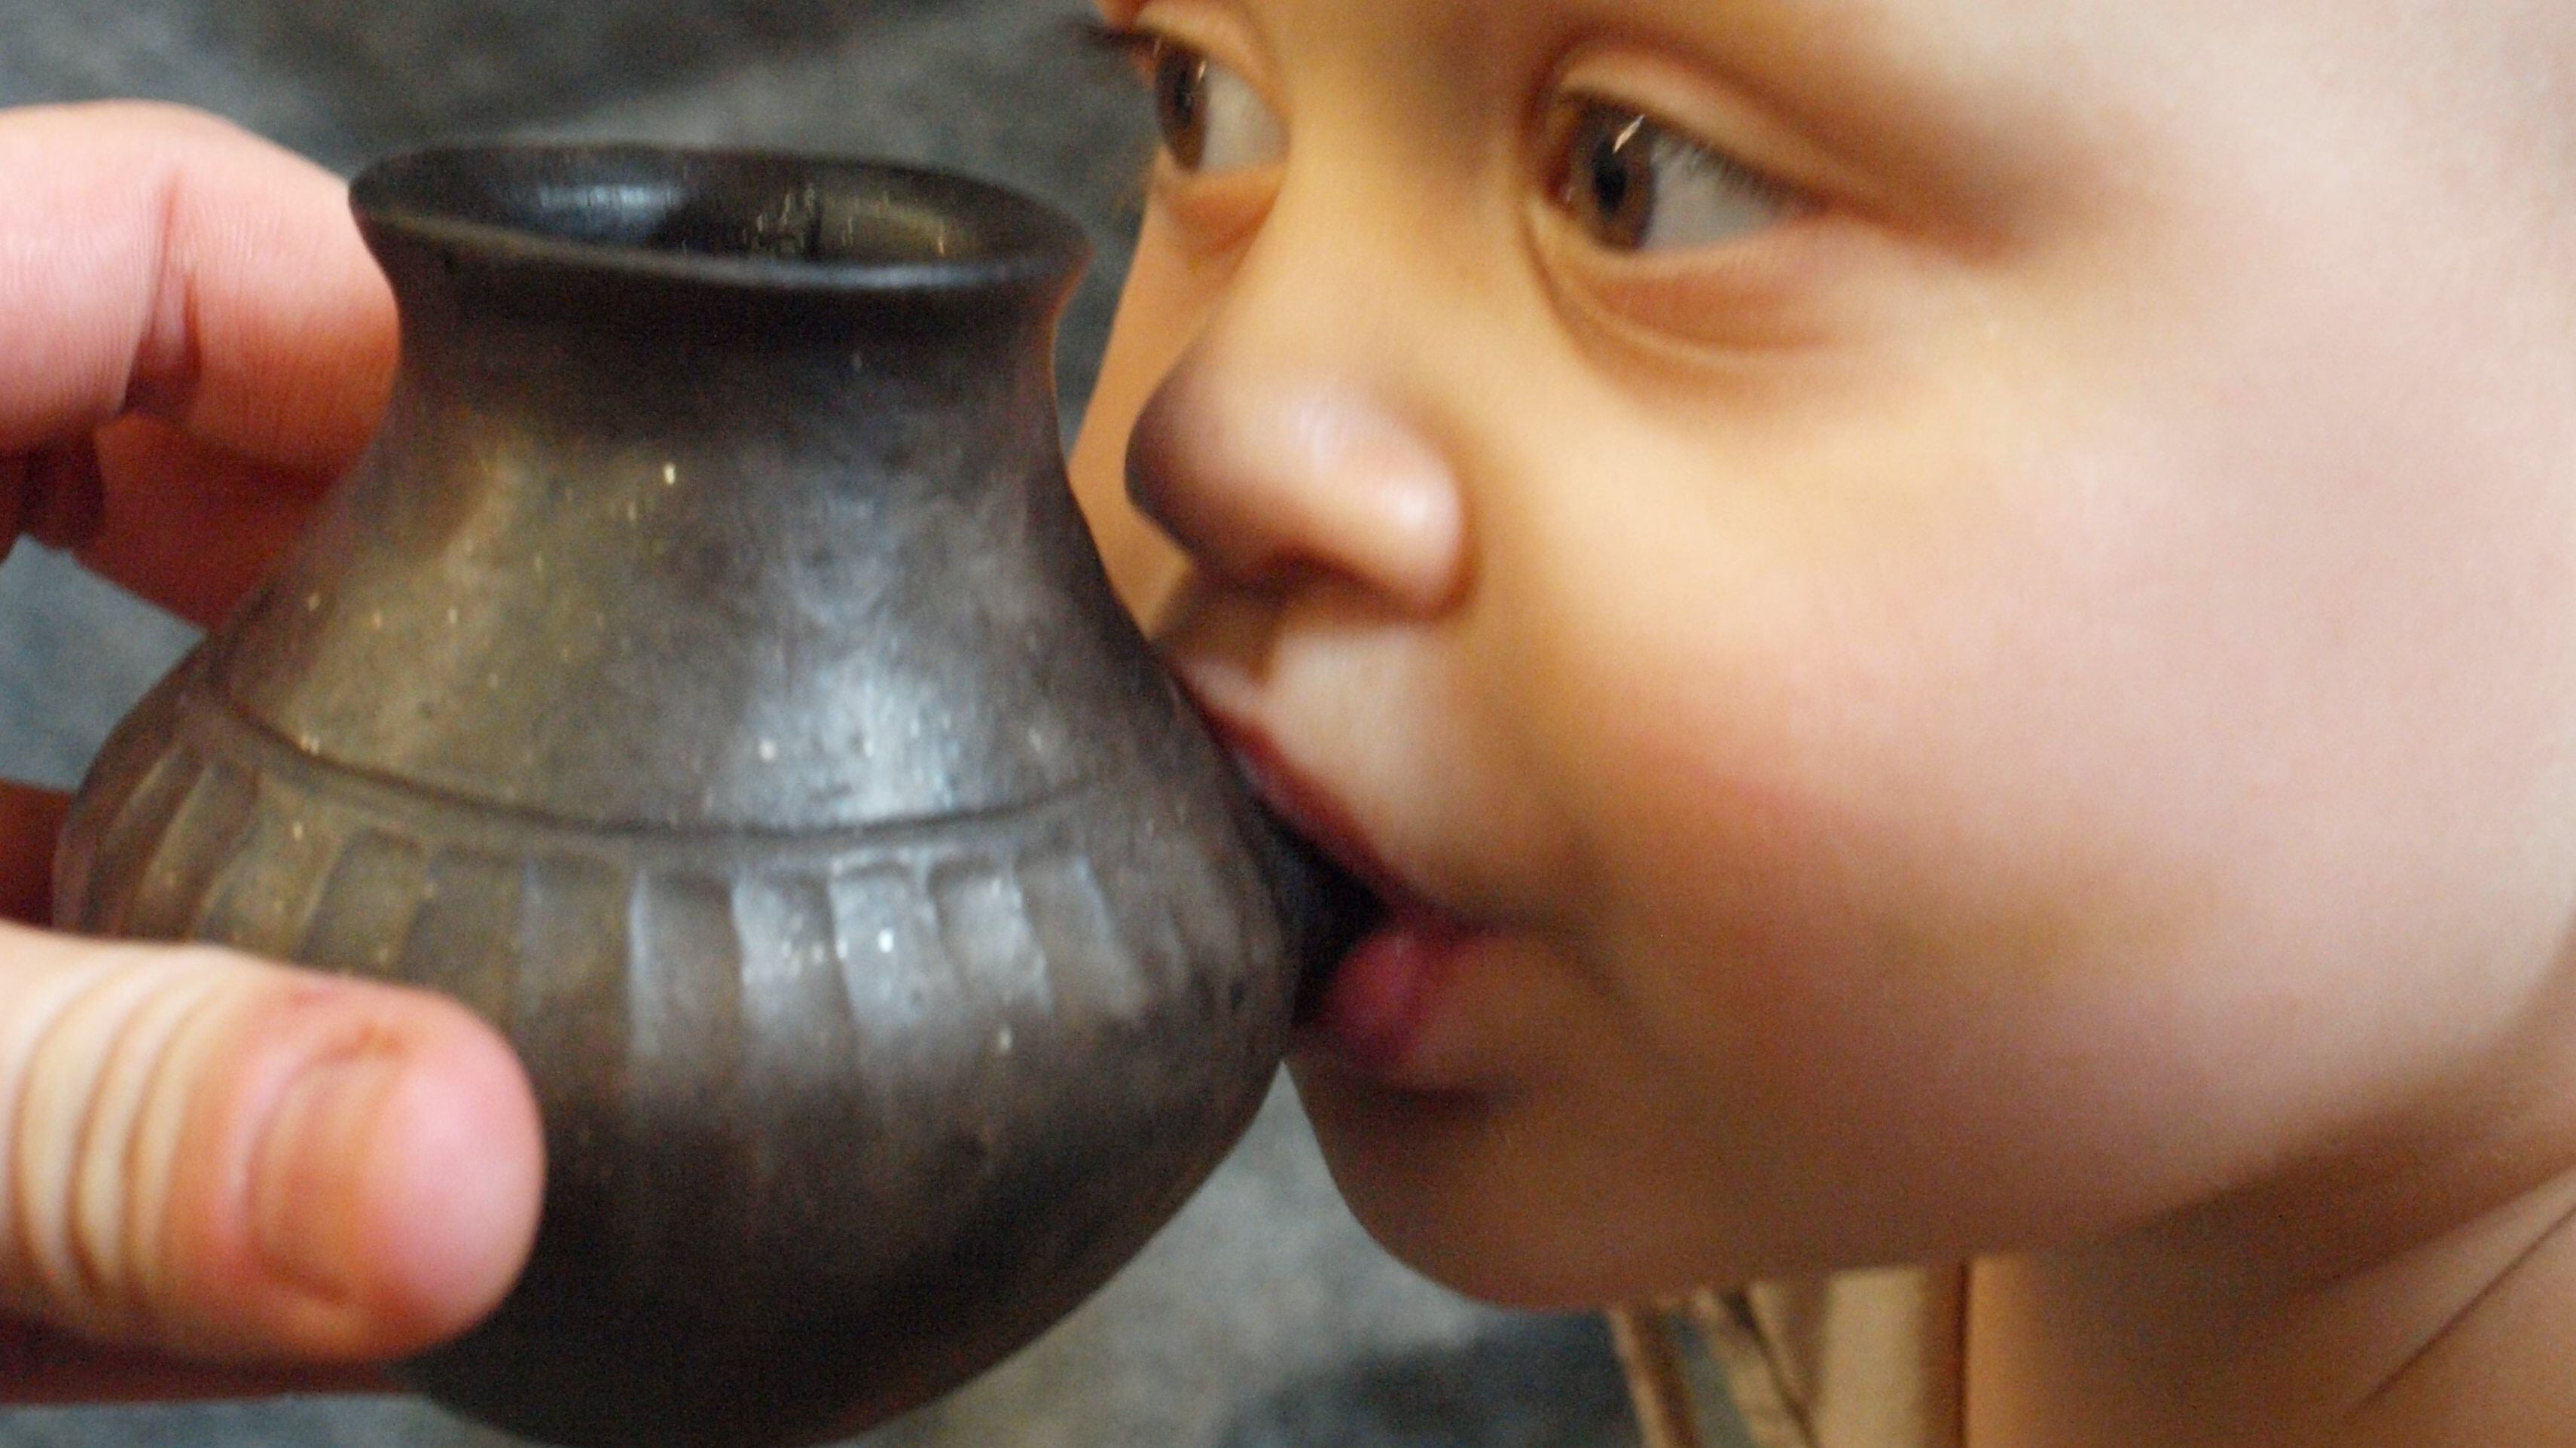 Chemical analysis of food in ancient clay vessels indicates the milk came from grazing animals.